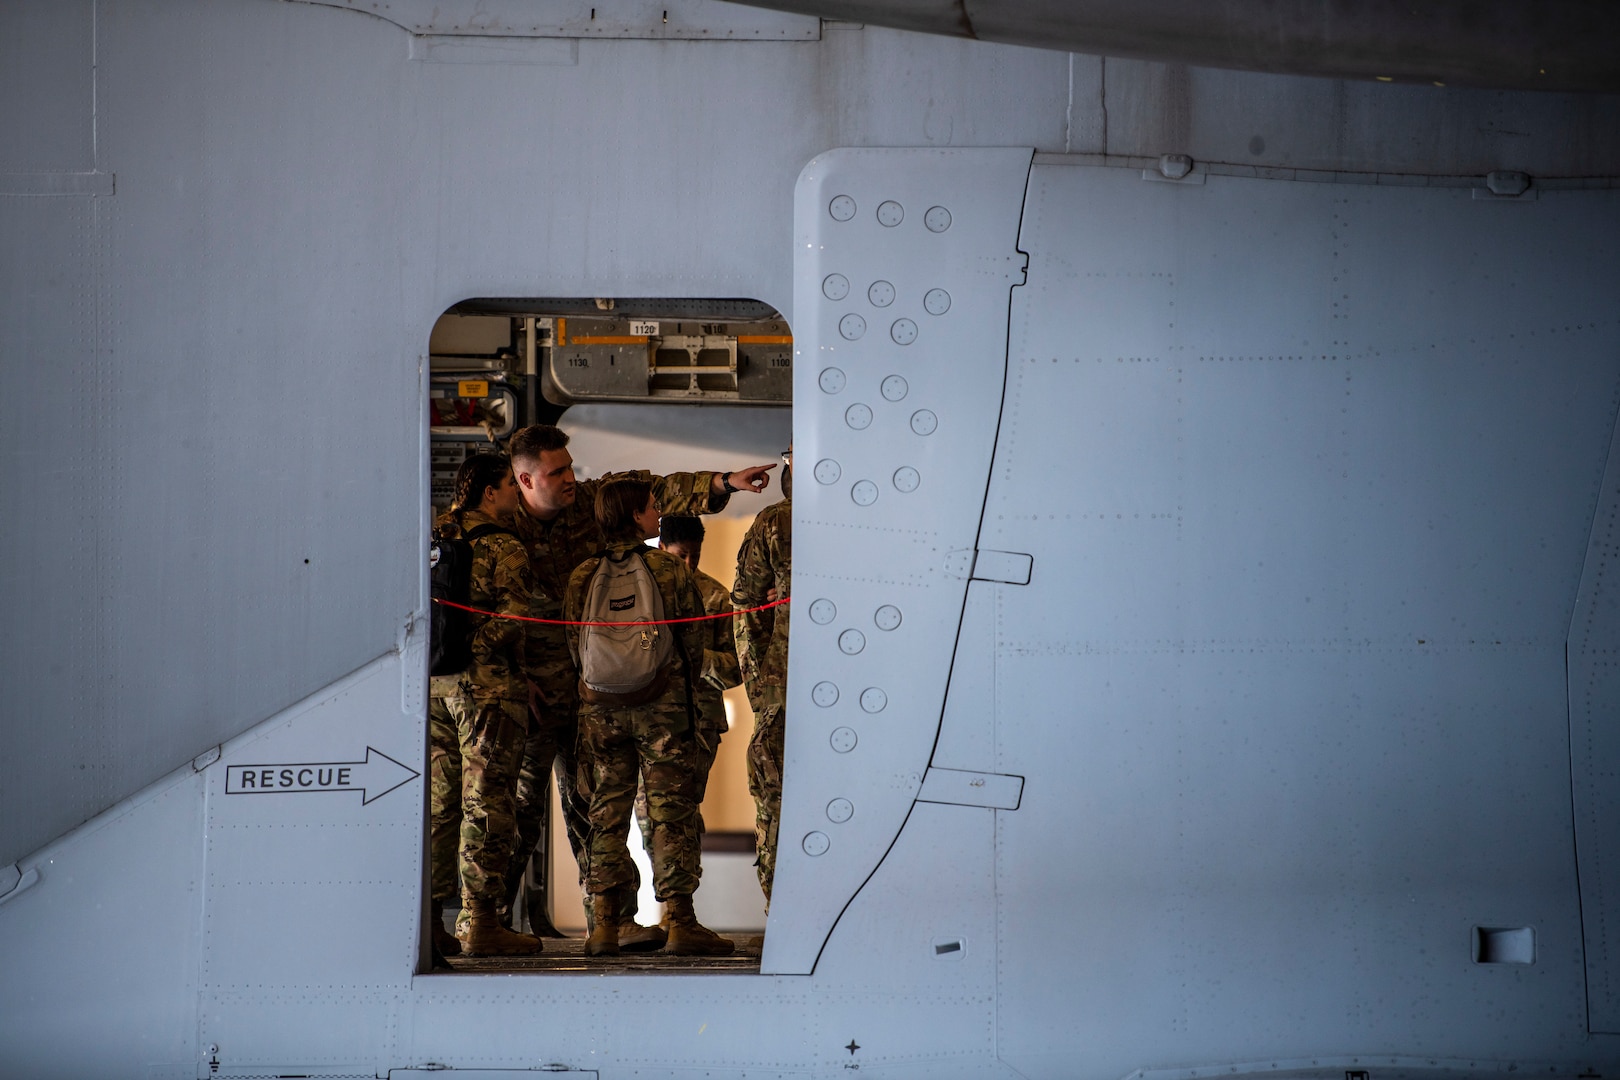 People stand inside a large military aircraft.